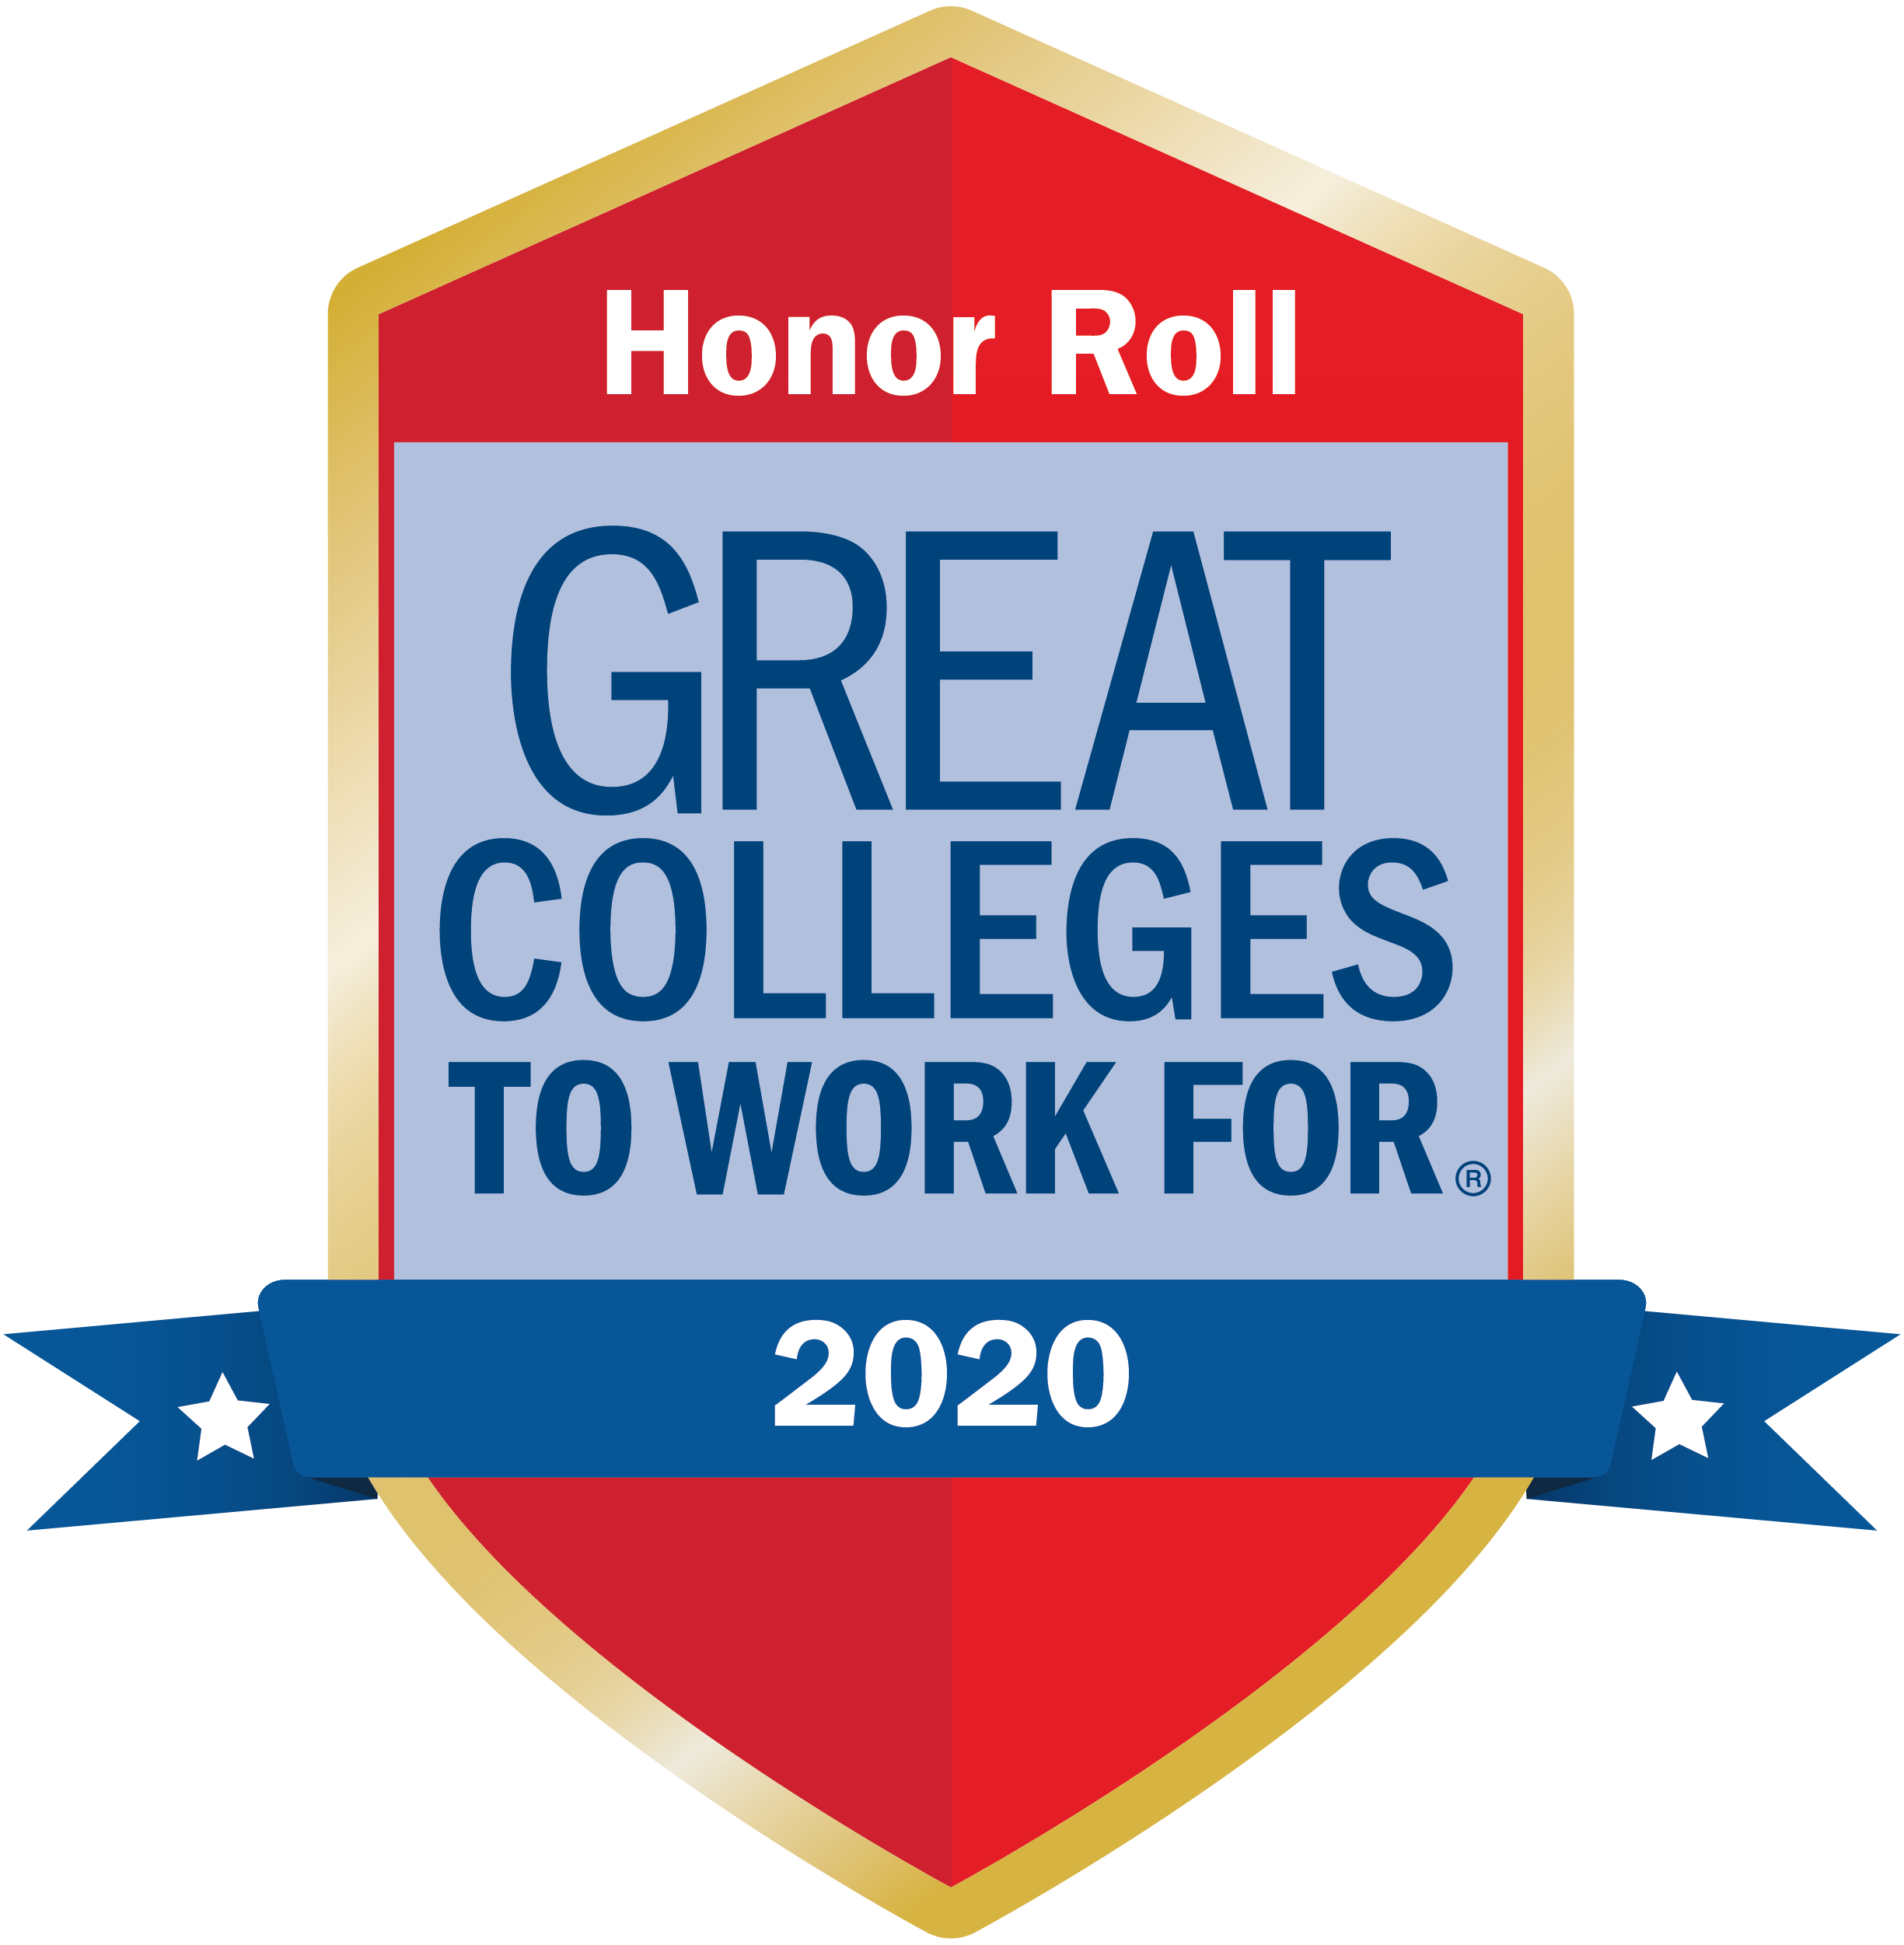 Great College to Work For Honor Roll Logo